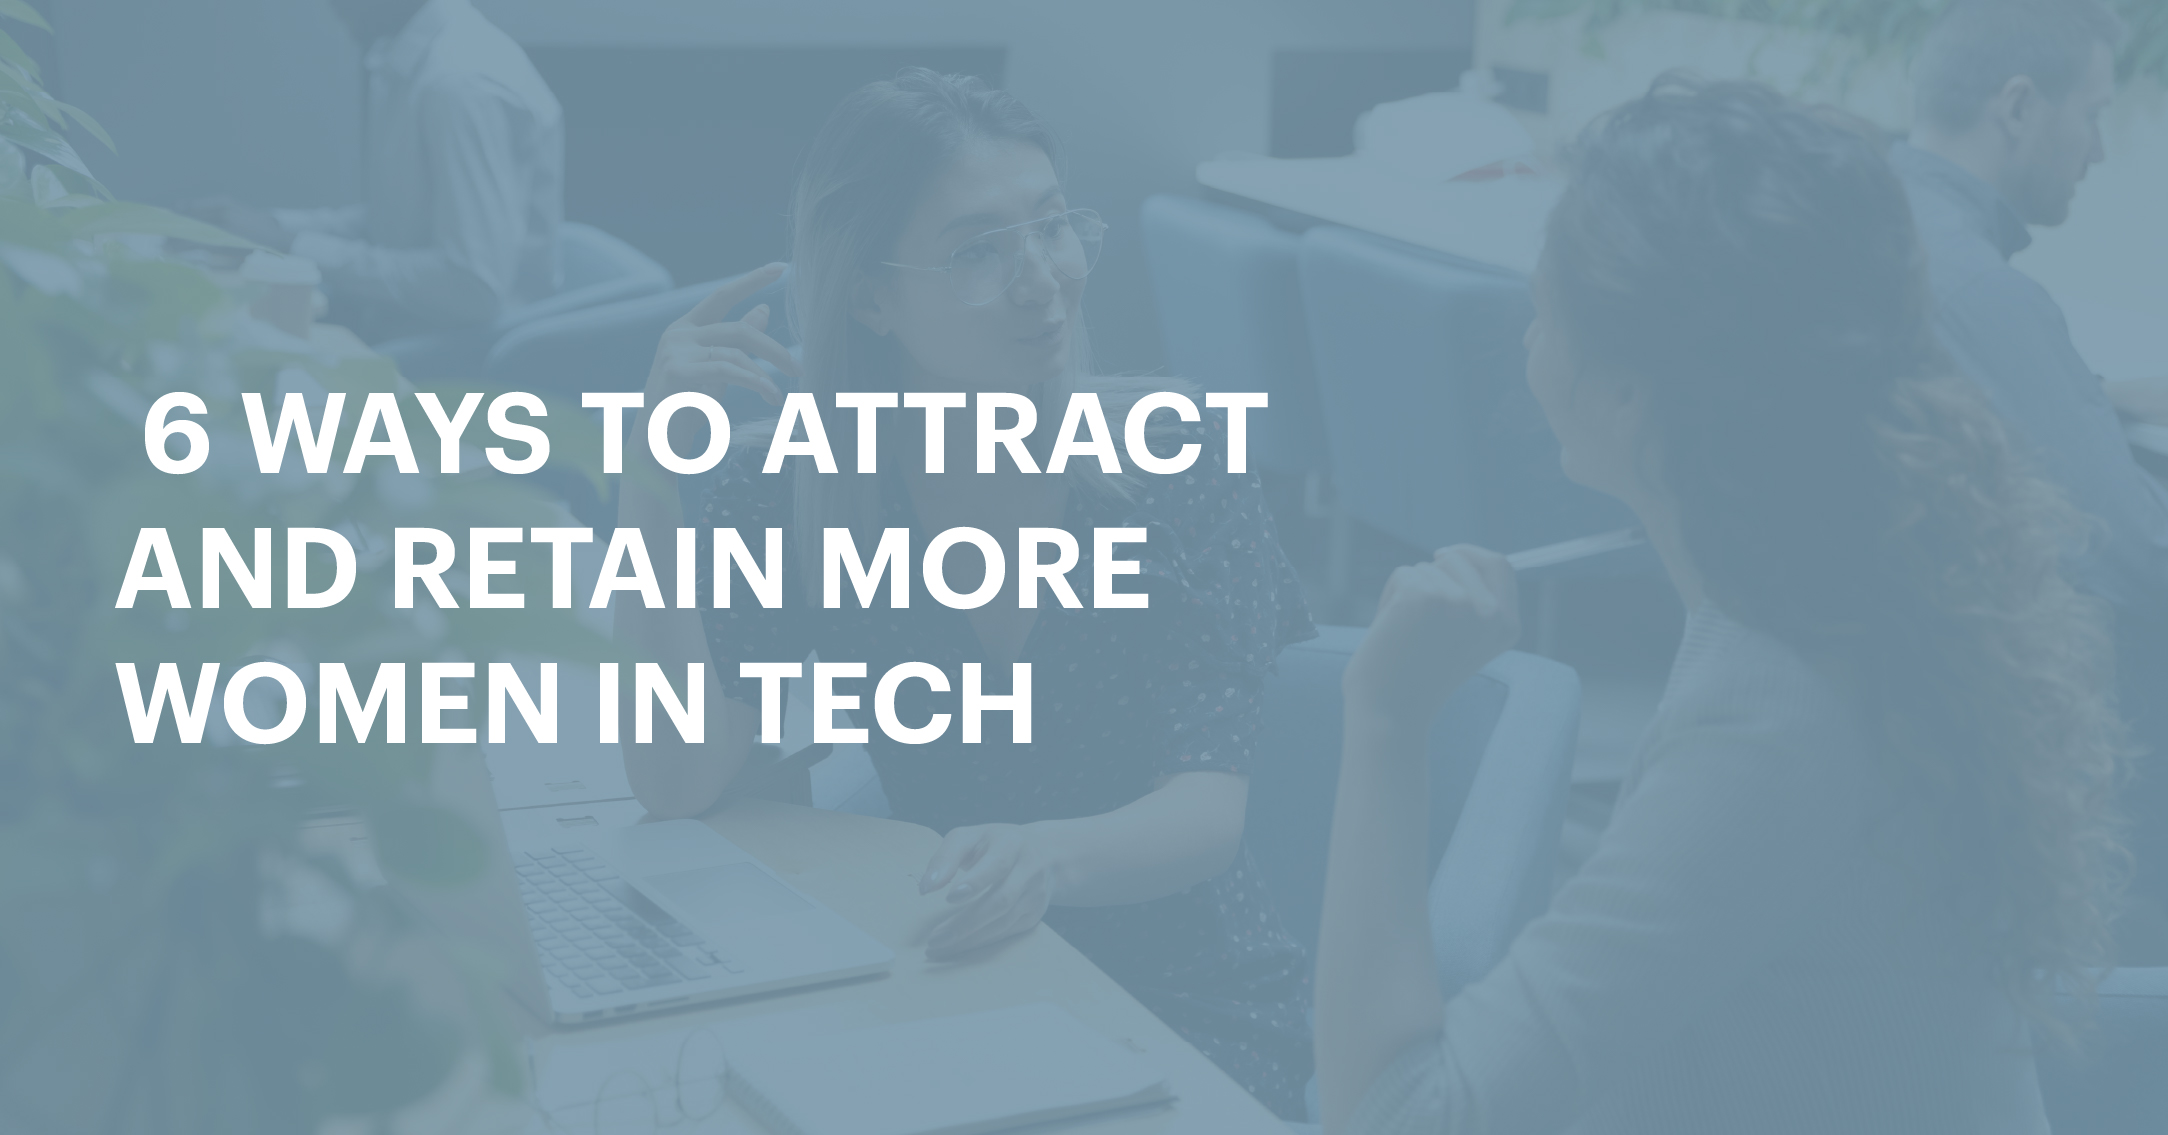 6 ways to attract and retain more women in tech  